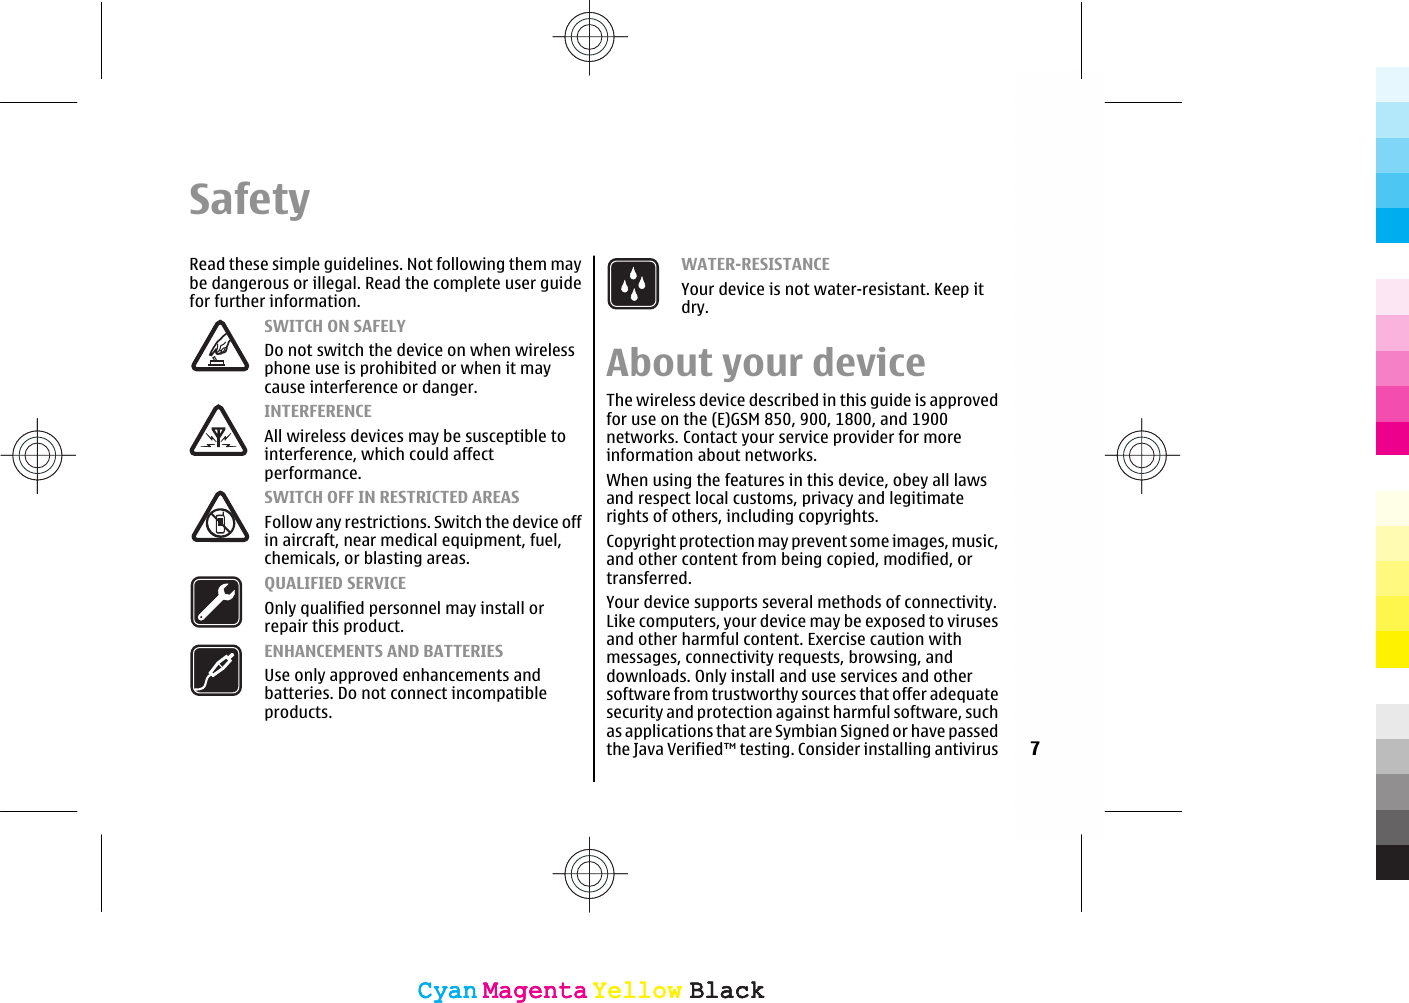 SafetyRead these simple guidelines. Not following them maybe dangerous or illegal. Read the complete user guidefor further information.SWITCH ON SAFELYDo not switch the device on when wirelessphone use is prohibited or when it maycause interference or danger.INTERFERENCEAll wireless devices may be susceptible tointerference, which could affectperformance.SWITCH OFF IN RESTRICTED AREASFollow any restrictions. Switch the device offin aircraft, near medical equipment, fuel,chemicals, or blasting areas.QUALIFIED SERVICEOnly qualified personnel may install orrepair this product.ENHANCEMENTS AND BATTERIESUse only approved enhancements andbatteries. Do not connect incompatibleproducts.WATER-RESISTANCEYour device is not water-resistant. Keep itdry.About your deviceThe wireless device described in this guide is approvedfor use on the (E)GSM 850, 900, 1800, and 1900networks. Contact your service provider for moreinformation about networks.When using the features in this device, obey all lawsand respect local customs, privacy and legitimaterights of others, including copyrights.Copyright protection may prevent some images, music,and other content from being copied, modified, ortransferred.Your device supports several methods of connectivity.Like computers, your device may be exposed to virusesand other harmful content. Exercise caution withmessages, connectivity requests, browsing, anddownloads. Only install and use services and othersoftware from trustworthy sources that offer adequatesecurity and protection against harmful software, suchas applications that are Symbian Signed or have passedthe Java Verified™ testing. Consider installing antivirus 7CyanCyanMagentaMagentaYellowYellowBlackBlackCyanCyanMagentaMagentaYellowYellowBlackBlack